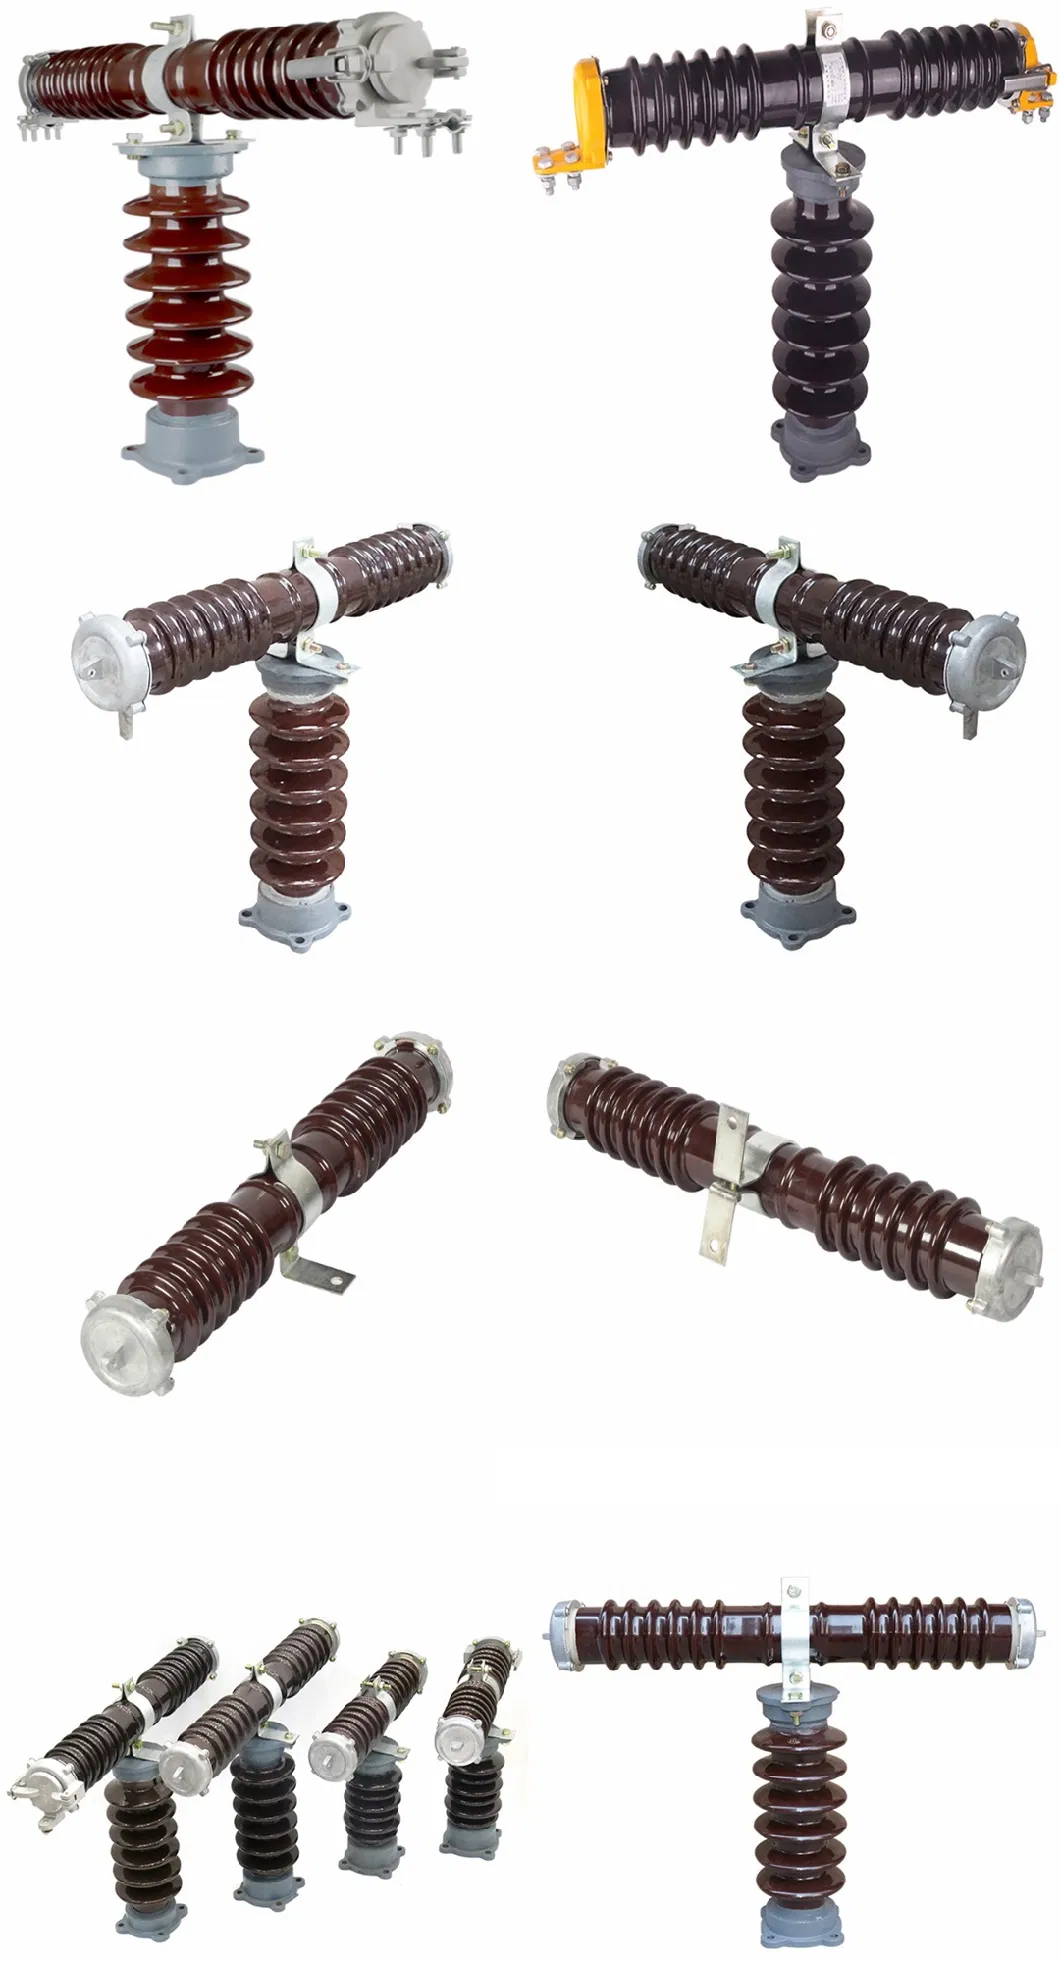 Rxwo/RW 35kv 600/2000mva 28ka Outdoor High Voltage Fuses for Power Transmission Lines 0.5-10A